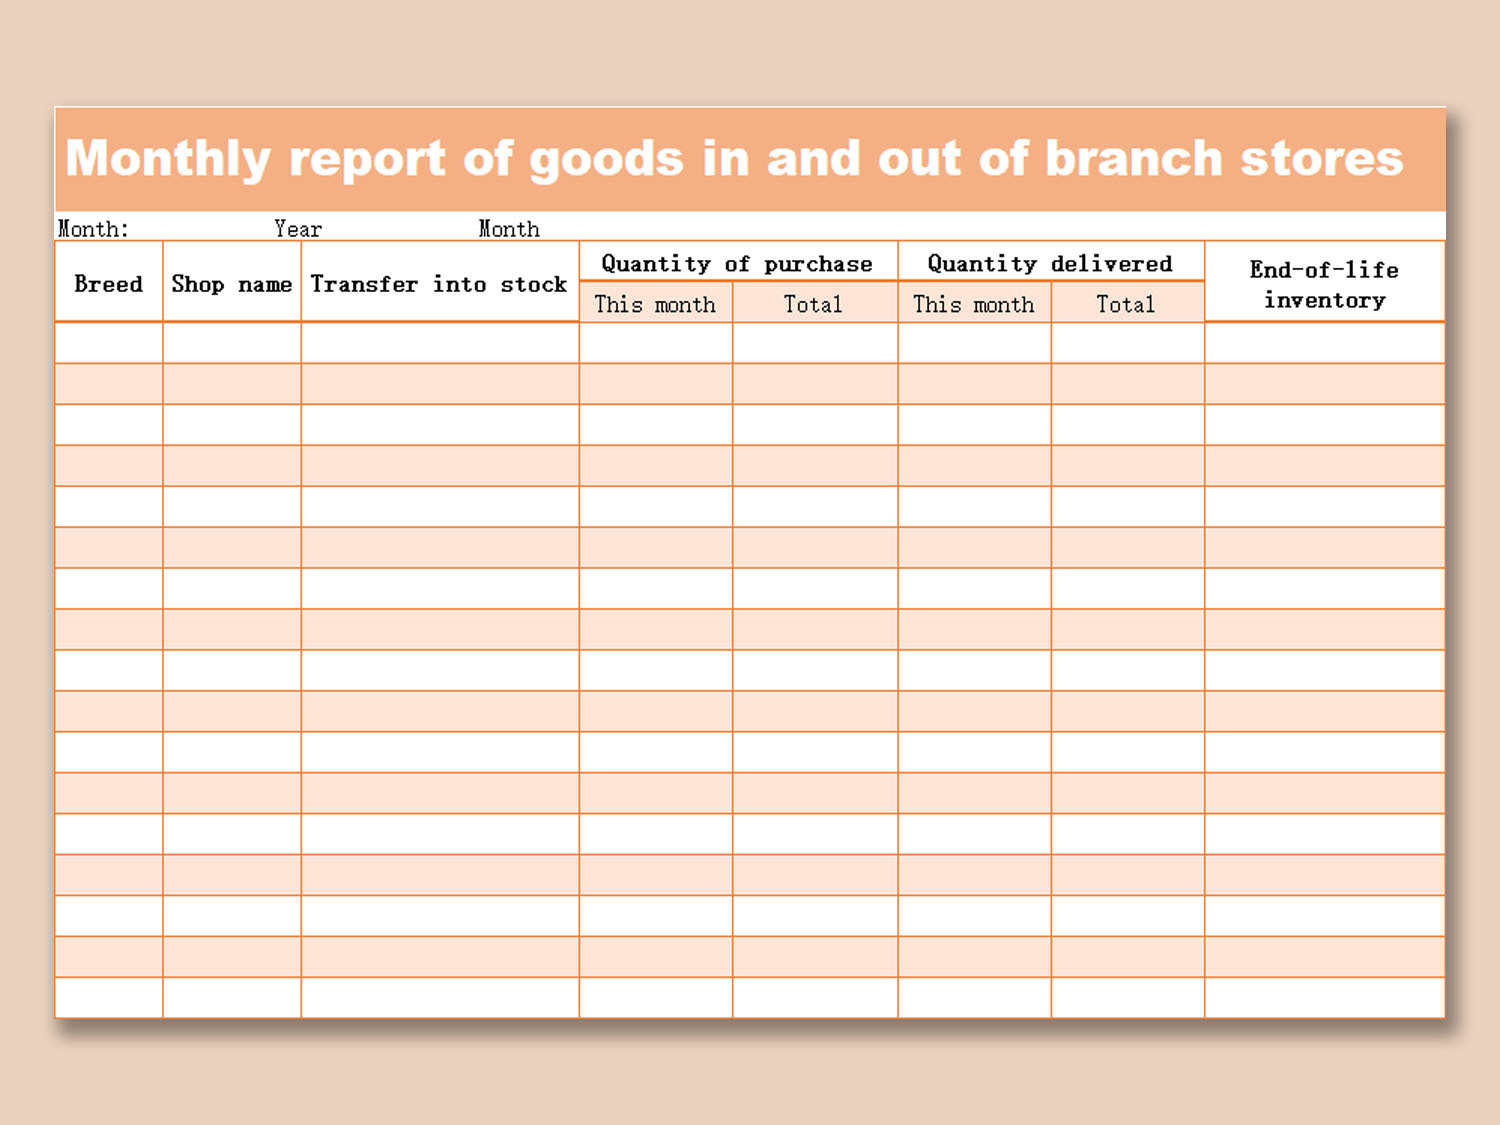 EXCEL of Monthly Report of Goods in and out of Branch Stores